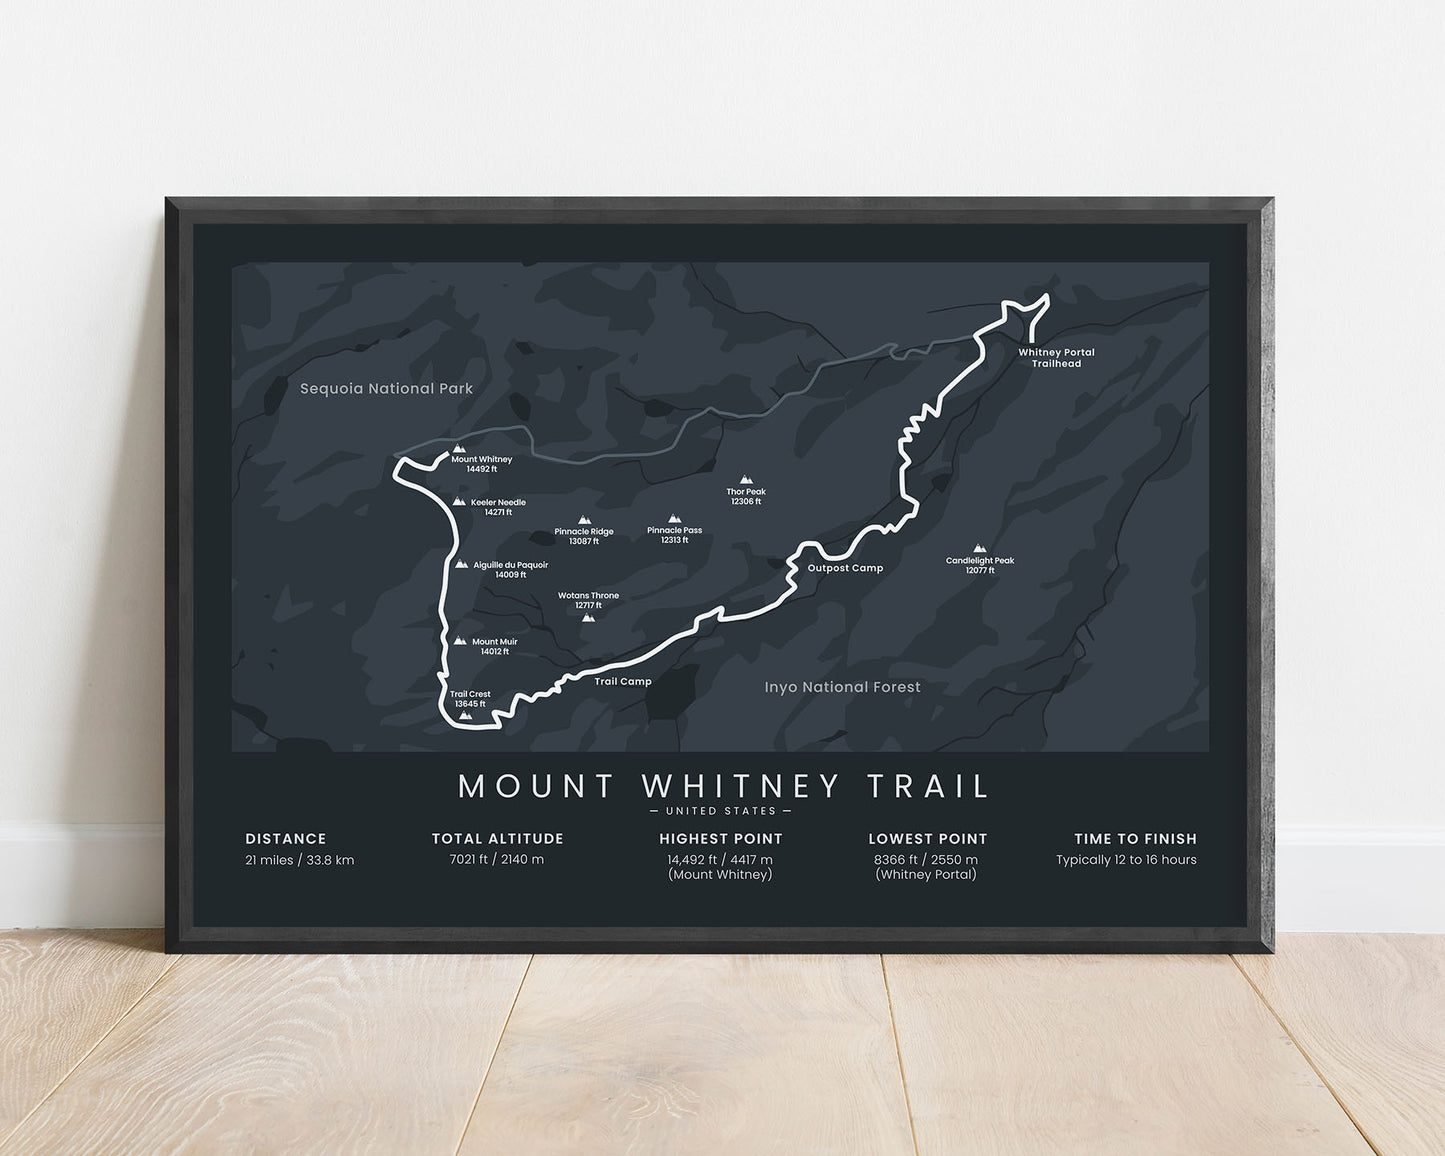 Mount Whitney Trail (Inyo National Forest) Trek Wall Decor with black background